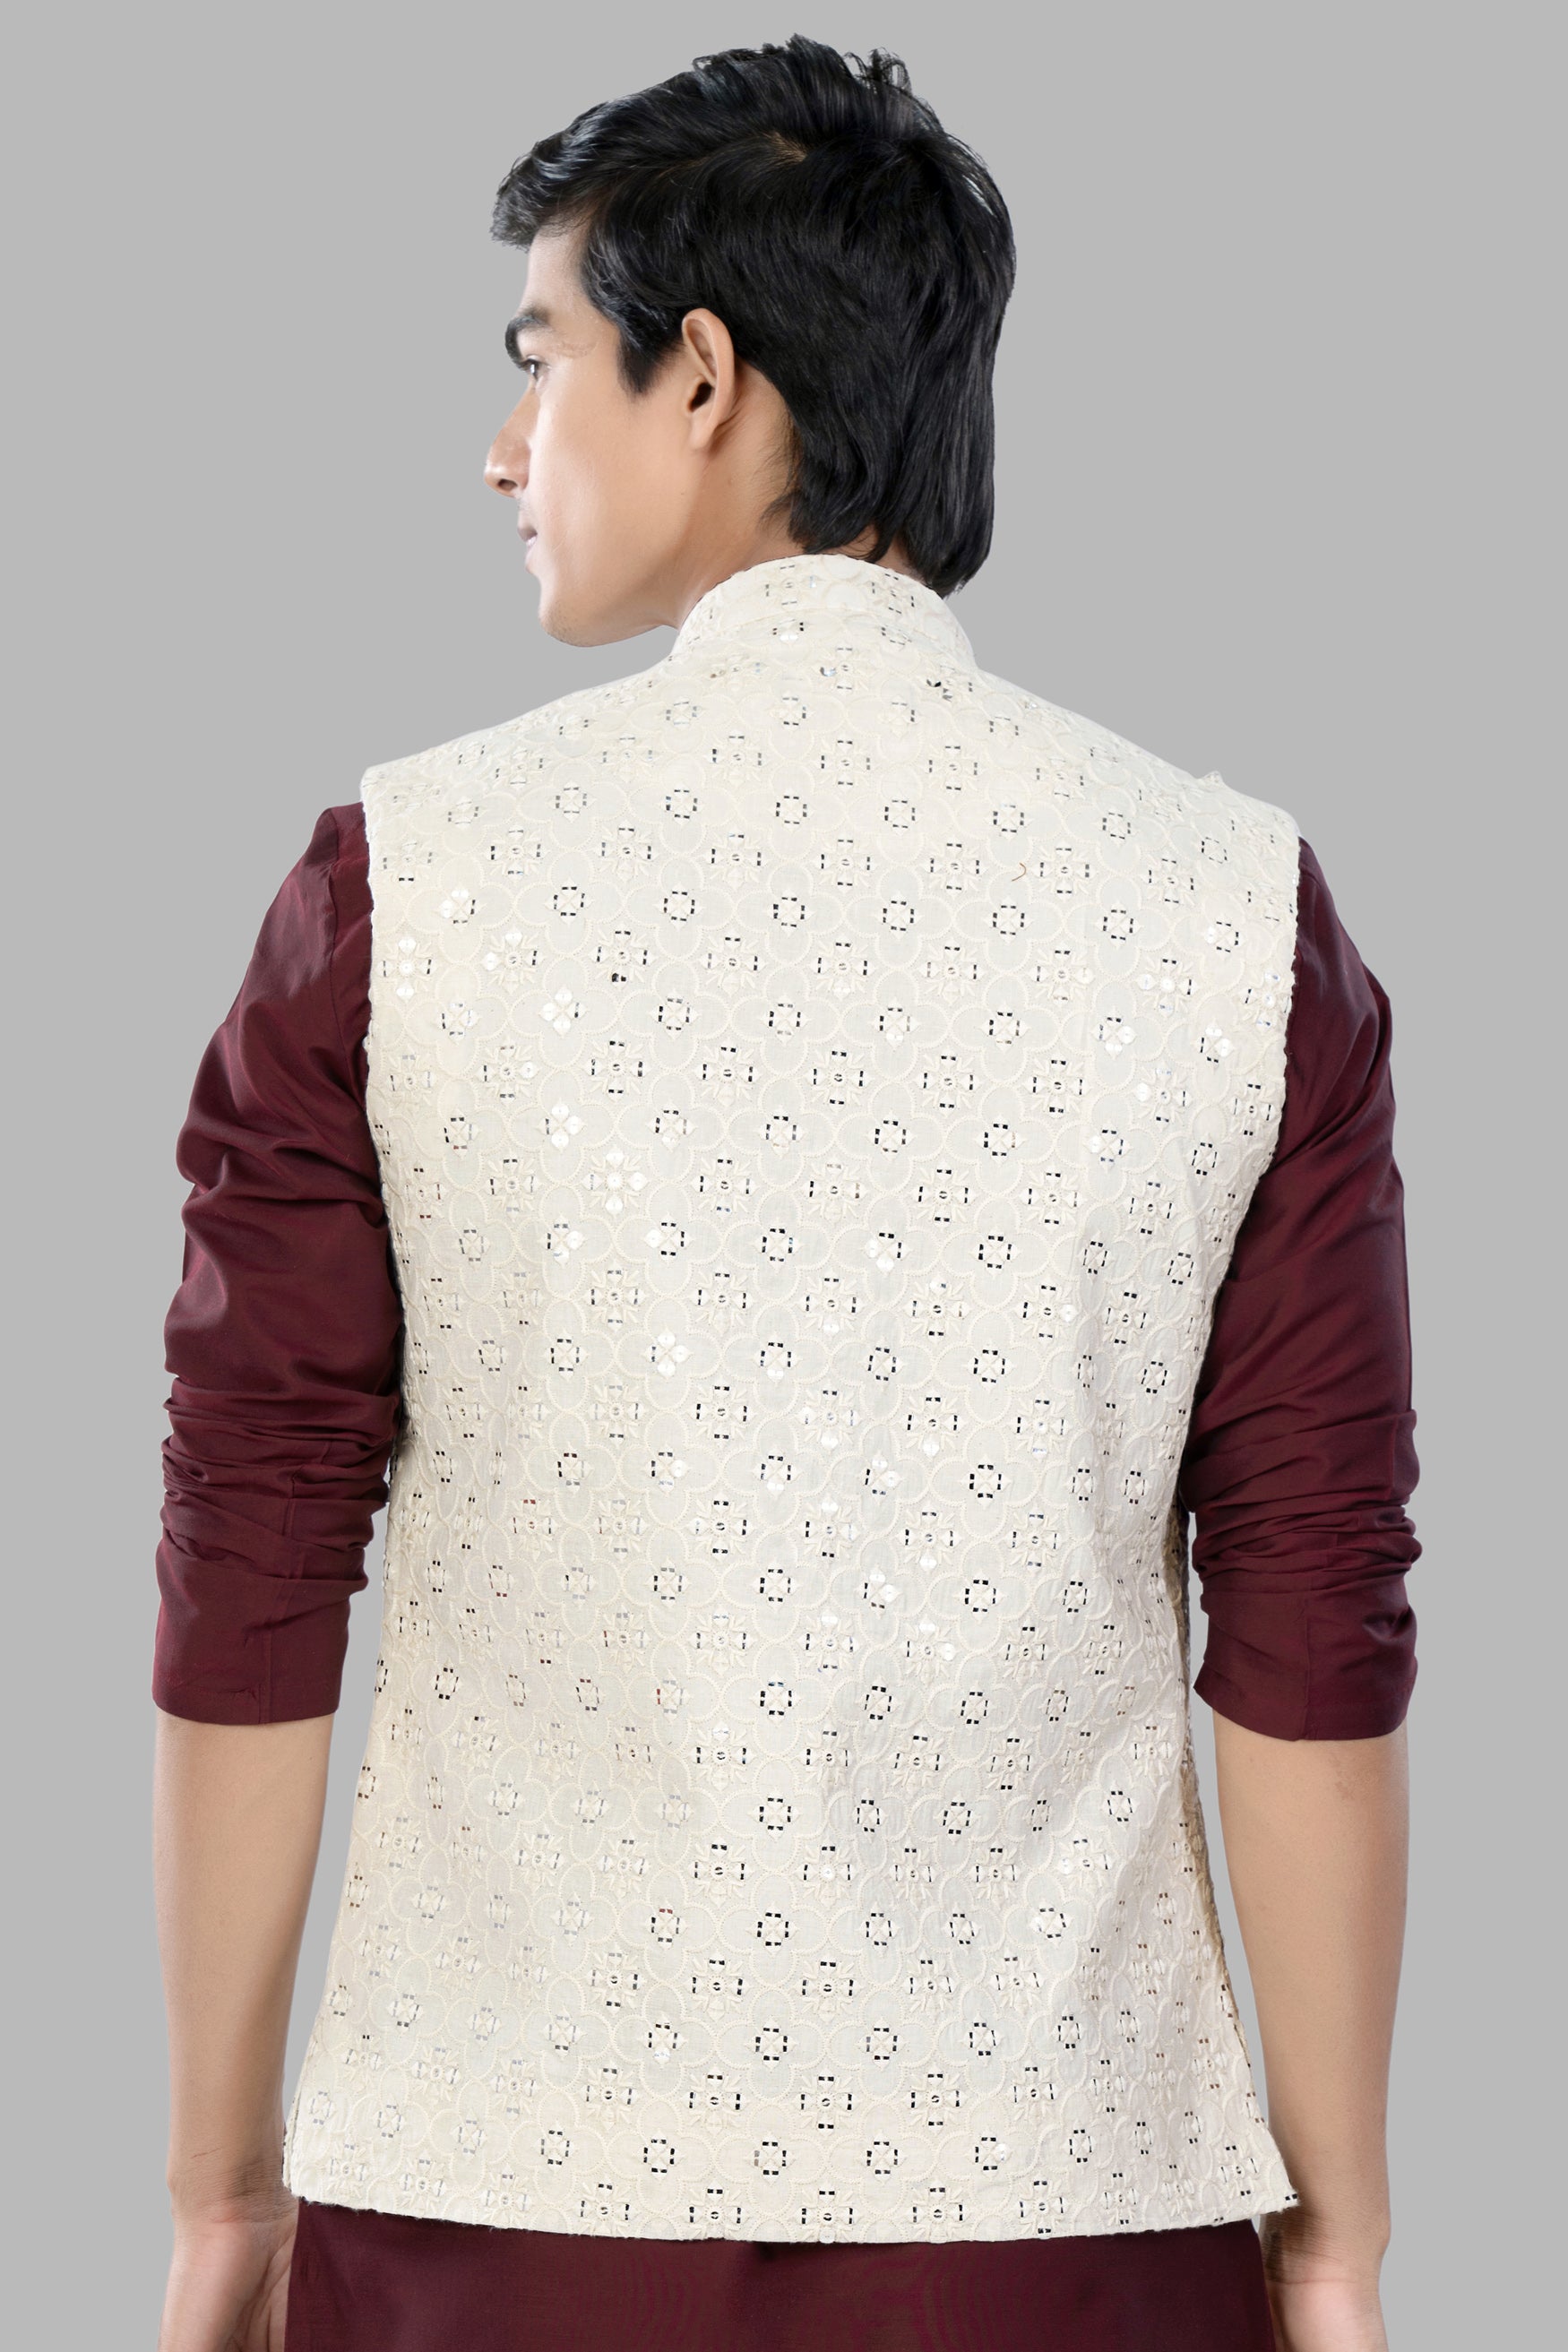 Ivory Cream Moroccan Thread and Sequin Embroidered Designer Nehru Jacket WC3461-36,  WC3461-38,  WC3461-40,  WC3461-42,  WC3461-44,  WC3461-46,  WC3461-48,  WC3461-50,  WC3461-52,  WC3461-54,  WC3461-56,  WC3461-58,  WC3461-60